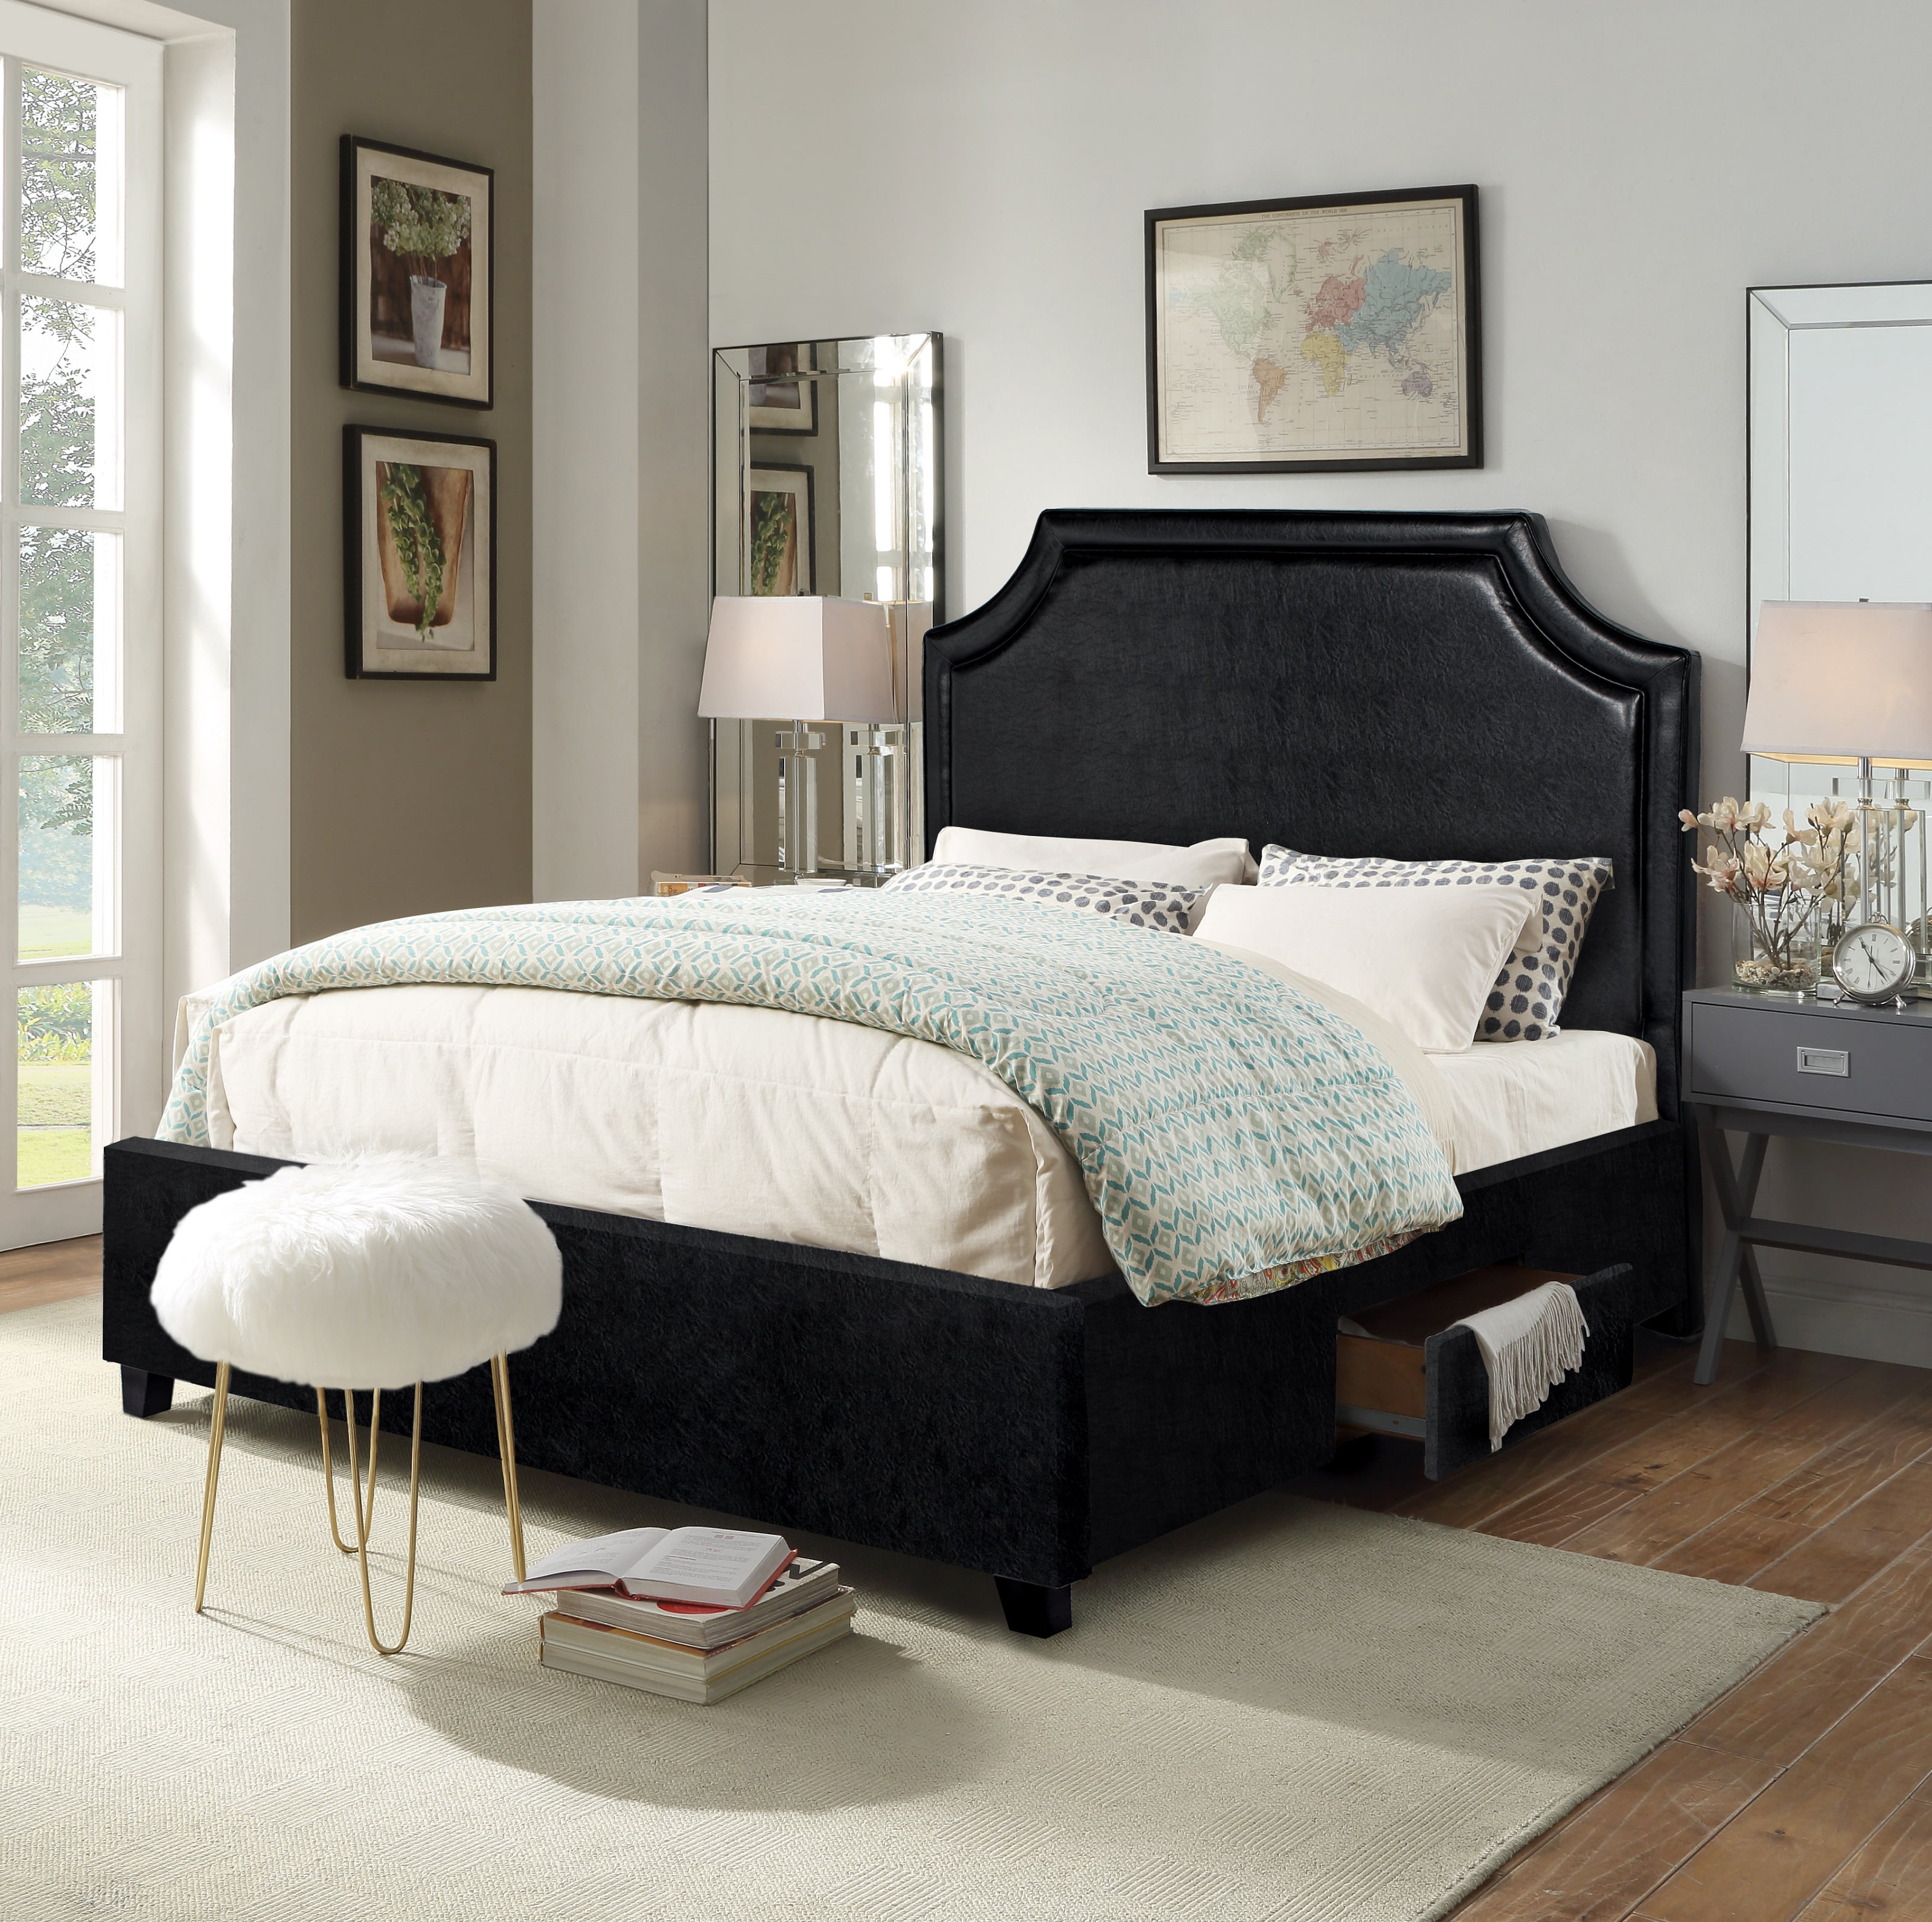 Chic Home Francis Platform Bed Frame, Leather Sleigh Bed With Drawers Underneath